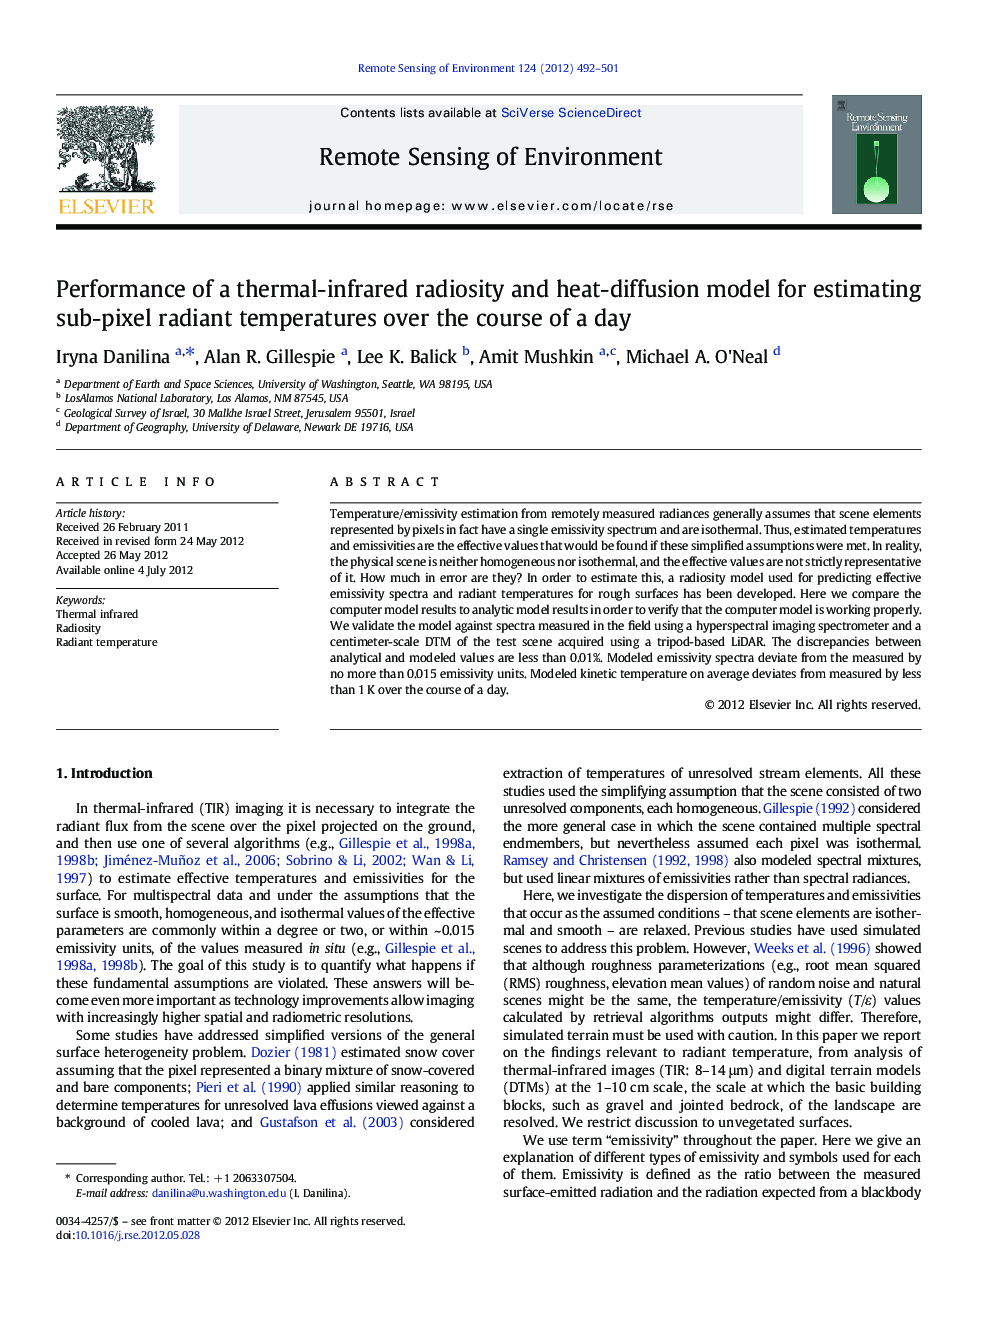 Performance of a thermal-infrared radiosity and heat-diffusion model for estimating sub-pixel radiant temperatures over the course of a day